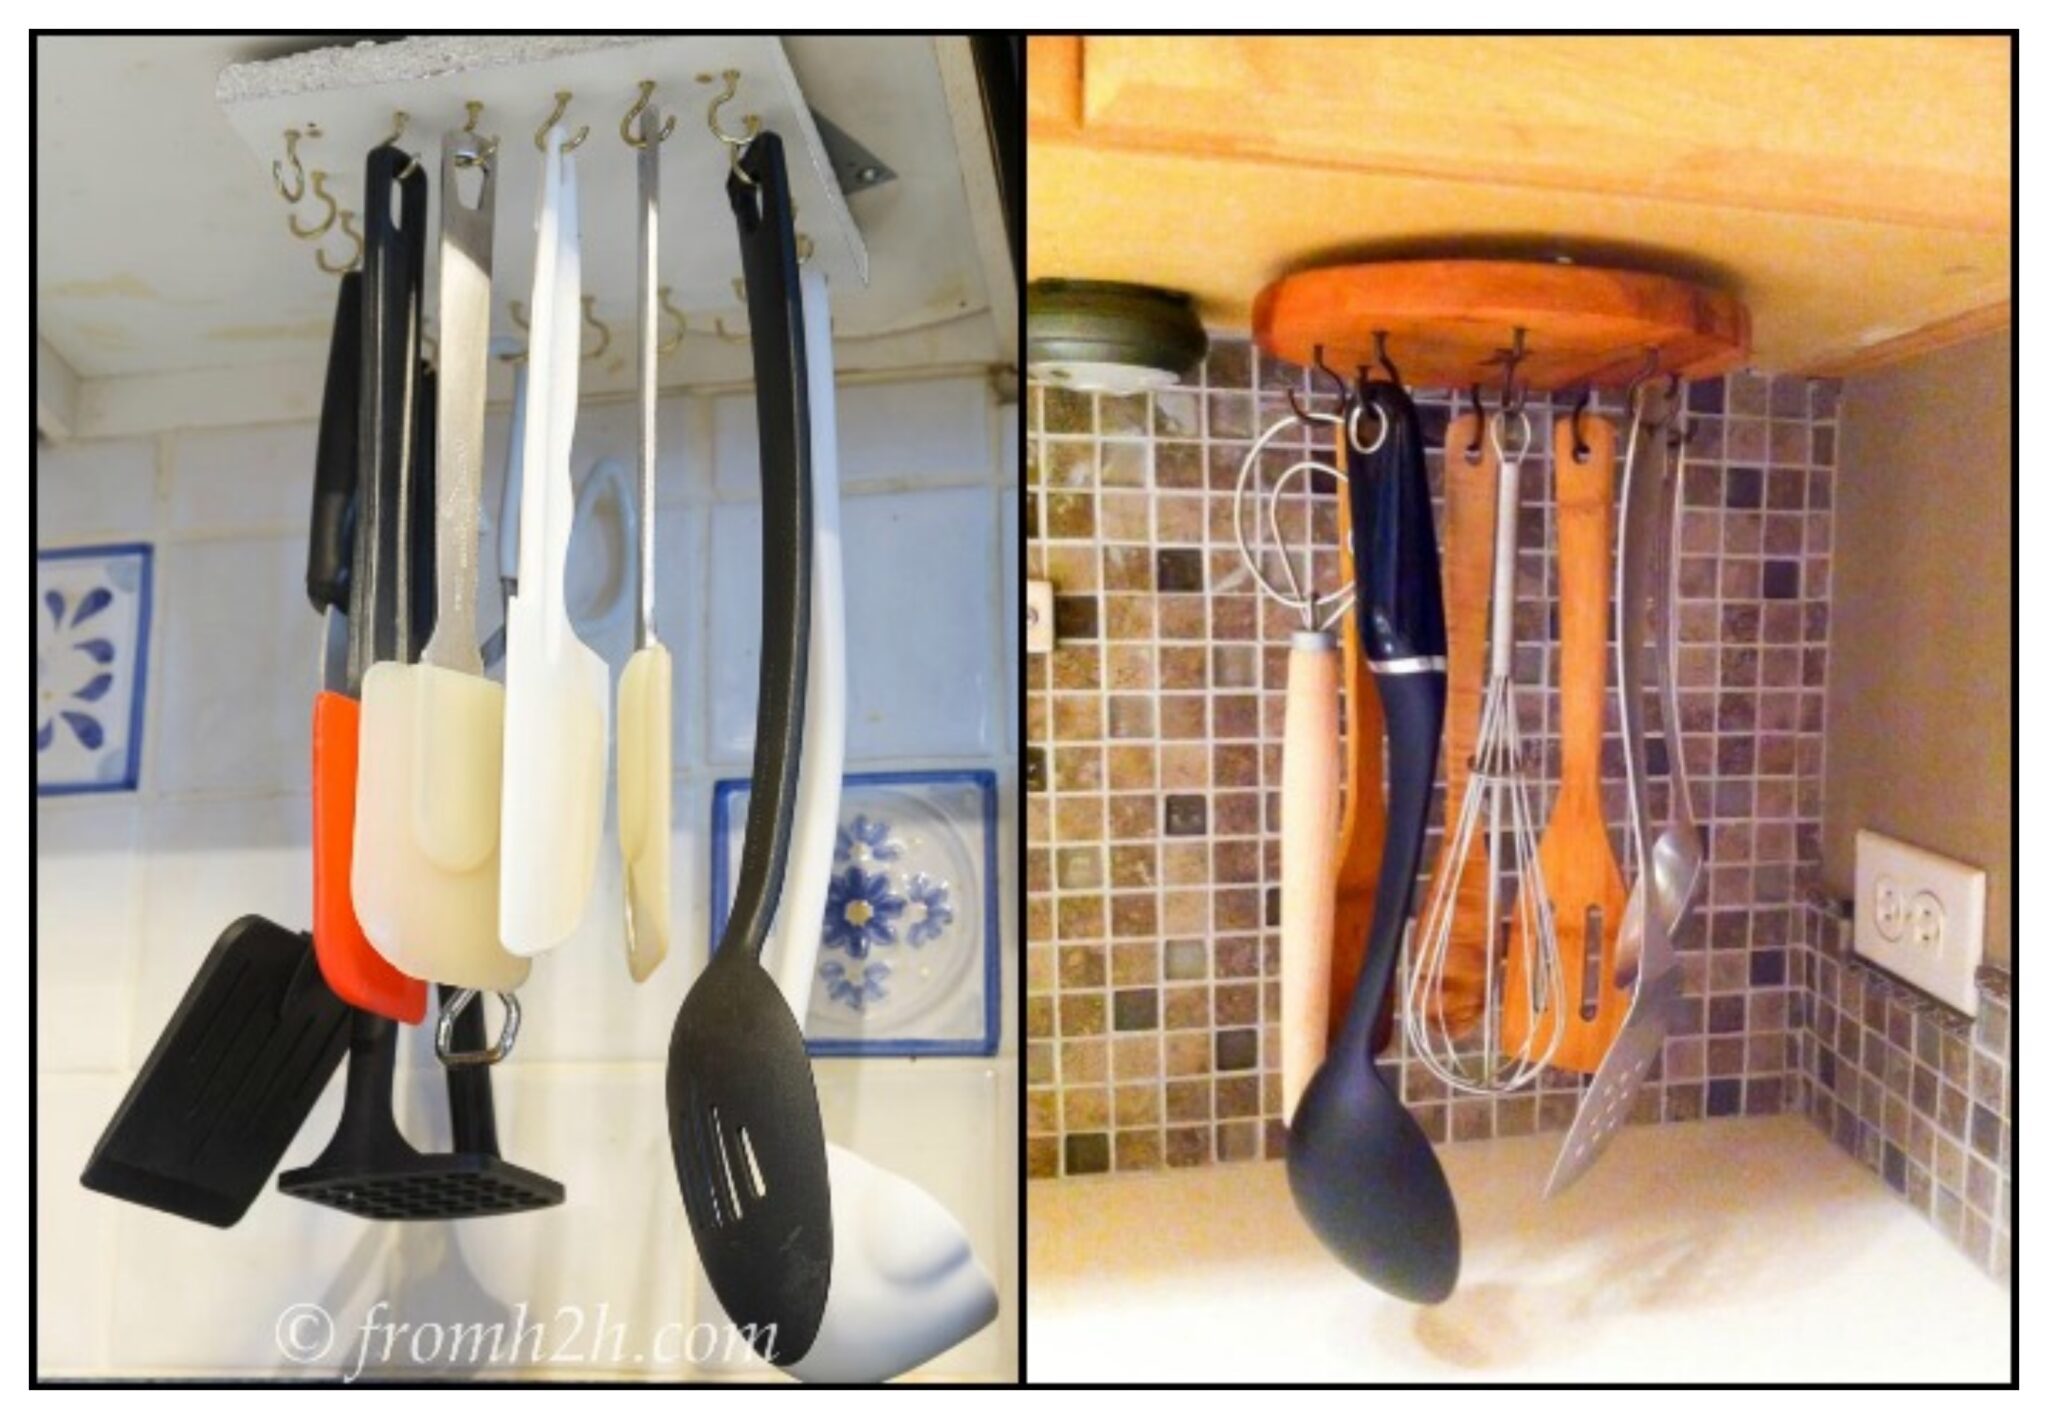 https://project.theownerbuildernetwork.co/files/2022/10/Lazy-Susan-Kitchen-Utensil-Storage-scaled.jpg